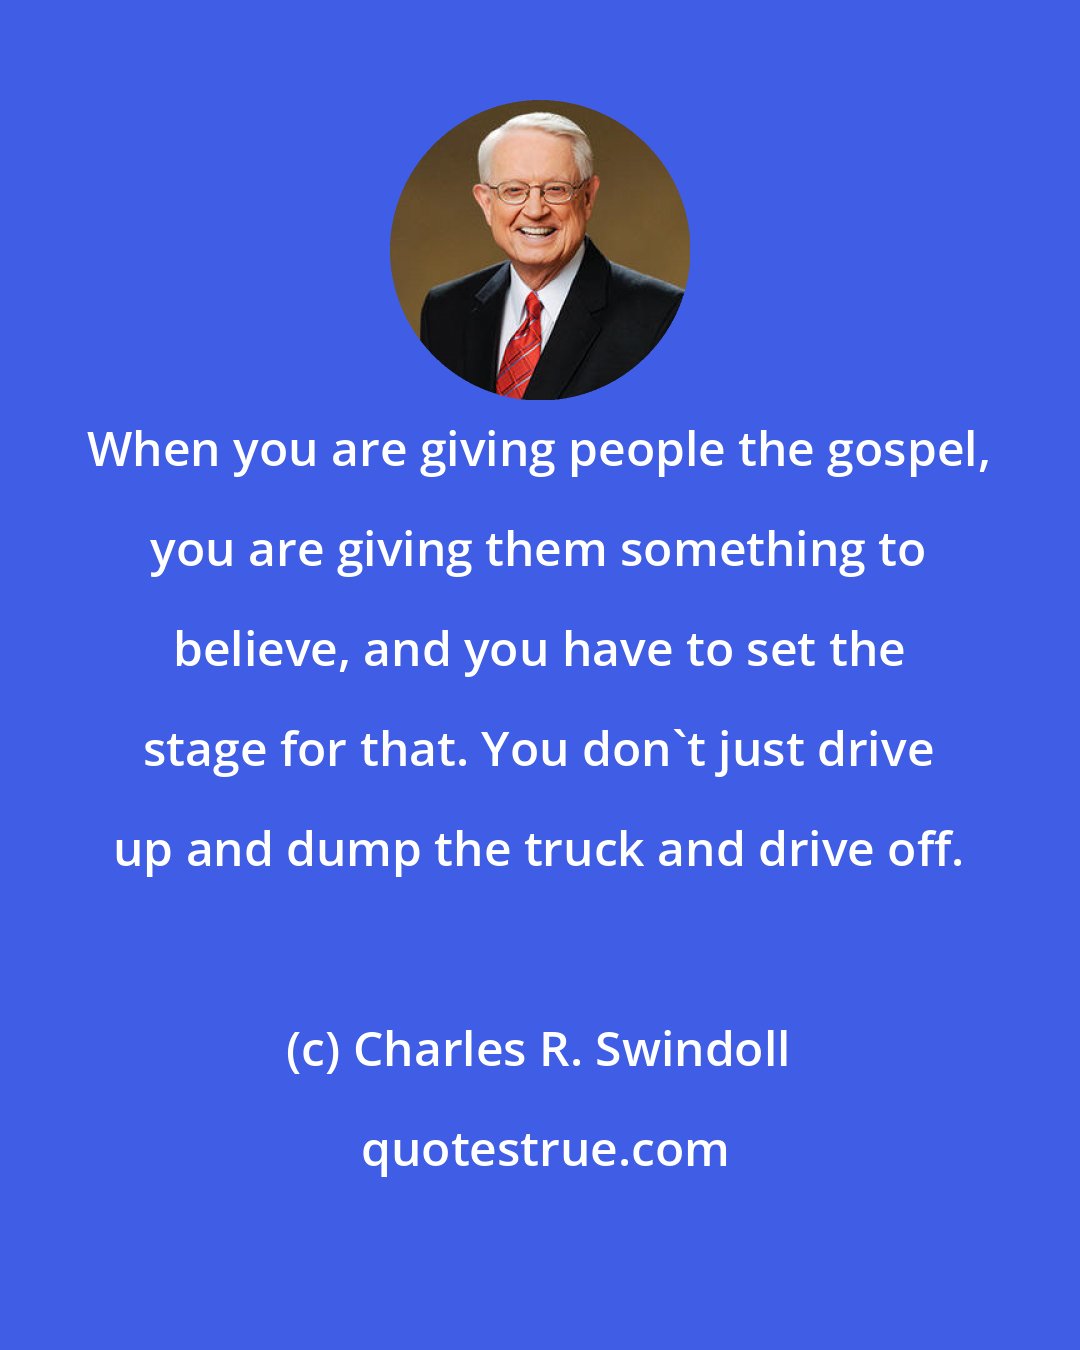 Charles R. Swindoll: When you are giving people the gospel, you are giving them something to believe, and you have to set the stage for that. You don't just drive up and dump the truck and drive off.